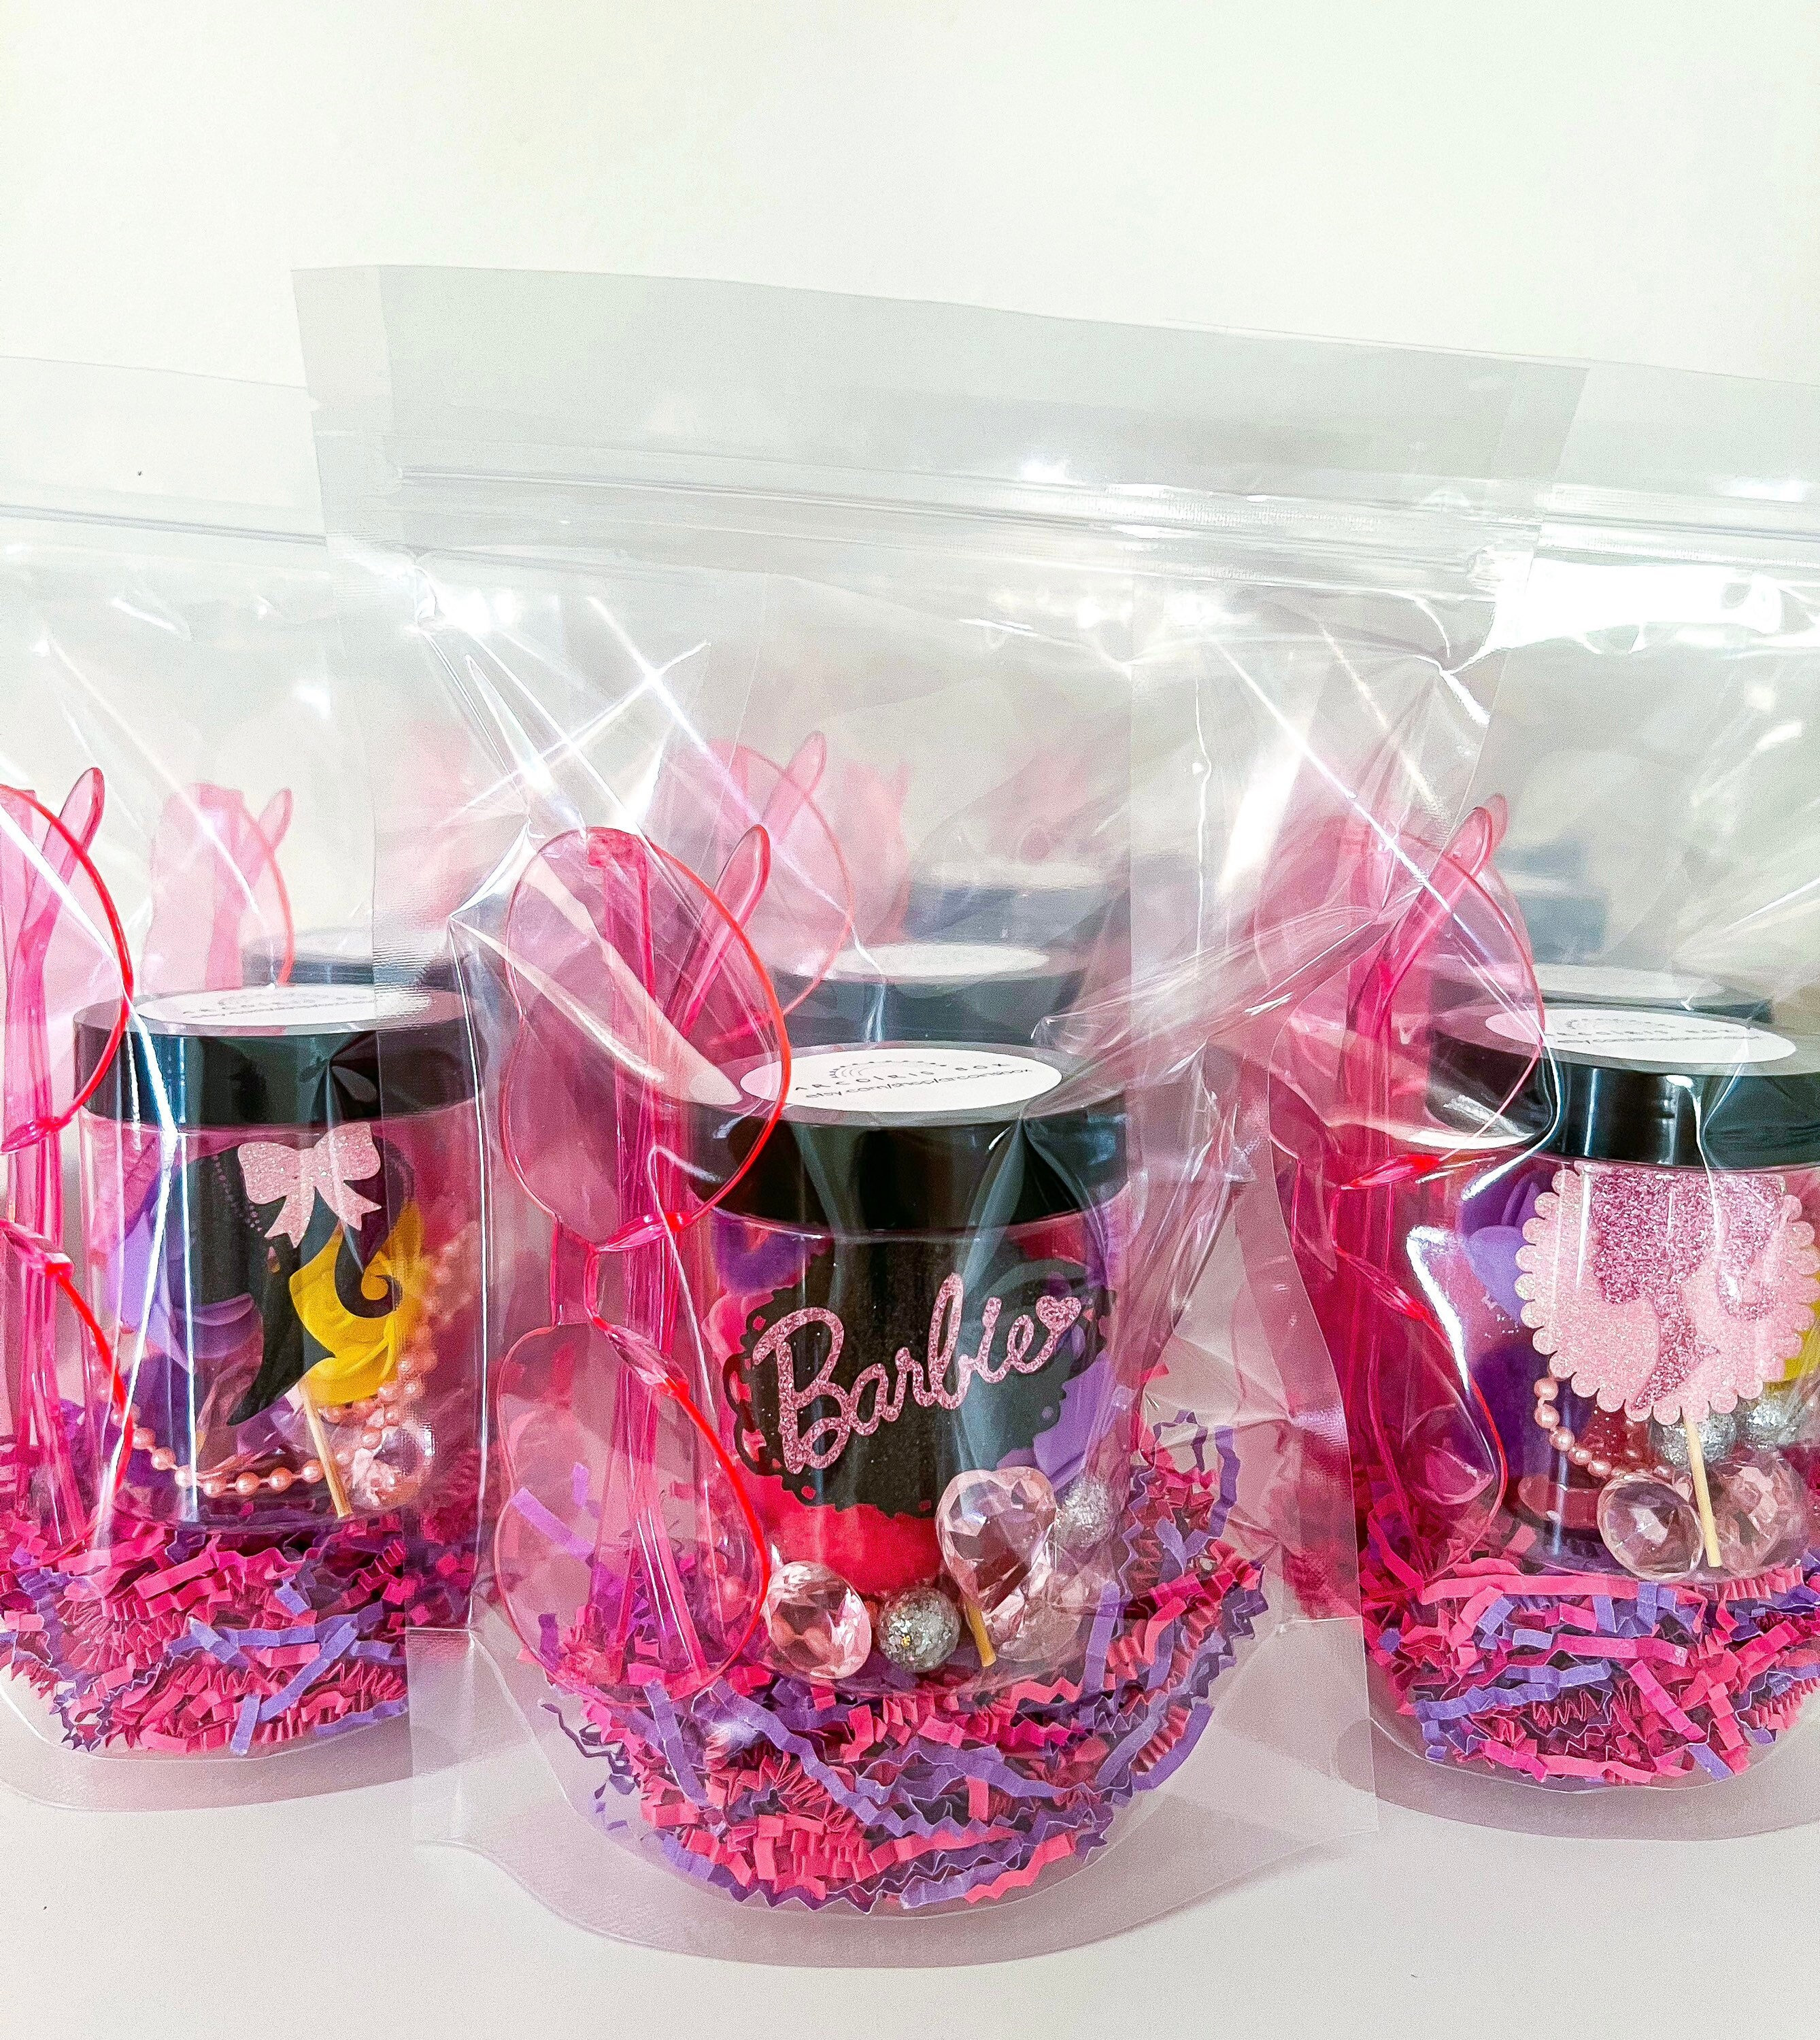 35 Original Party Favor Ideas That Will Make Your Kids Smile! - Playtivities